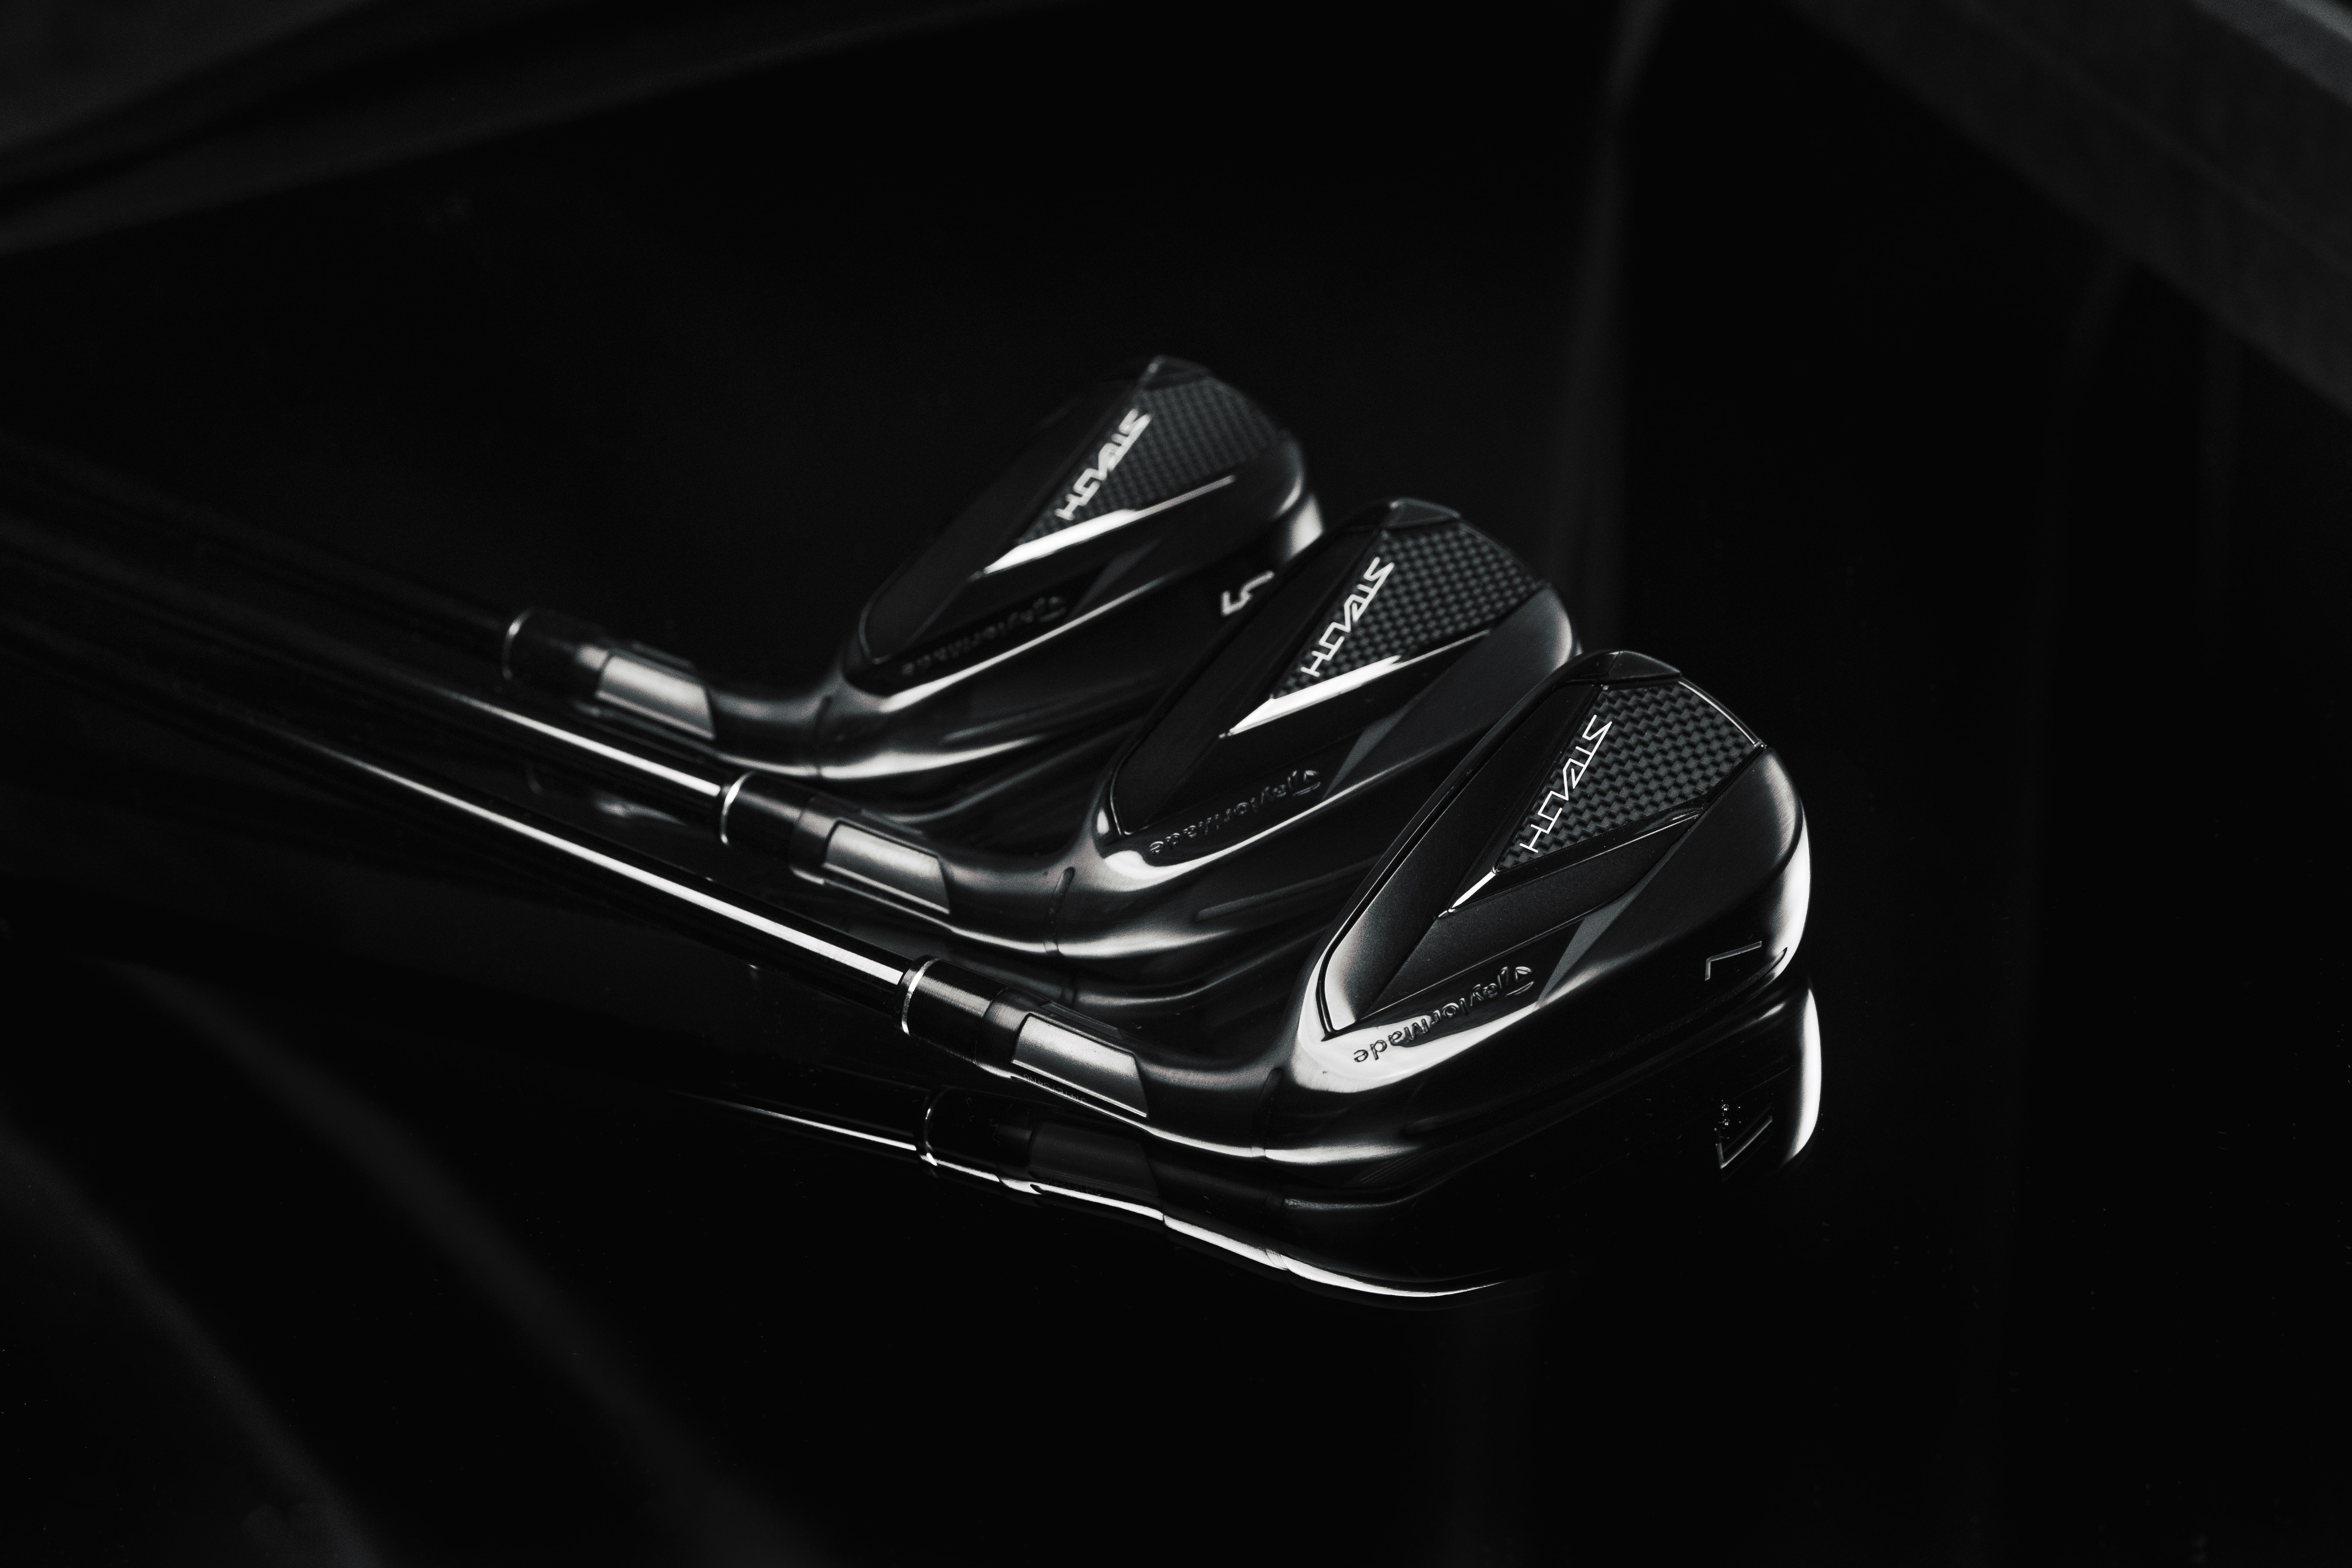 TaylorMade embraces the dark side with all-black Stealth